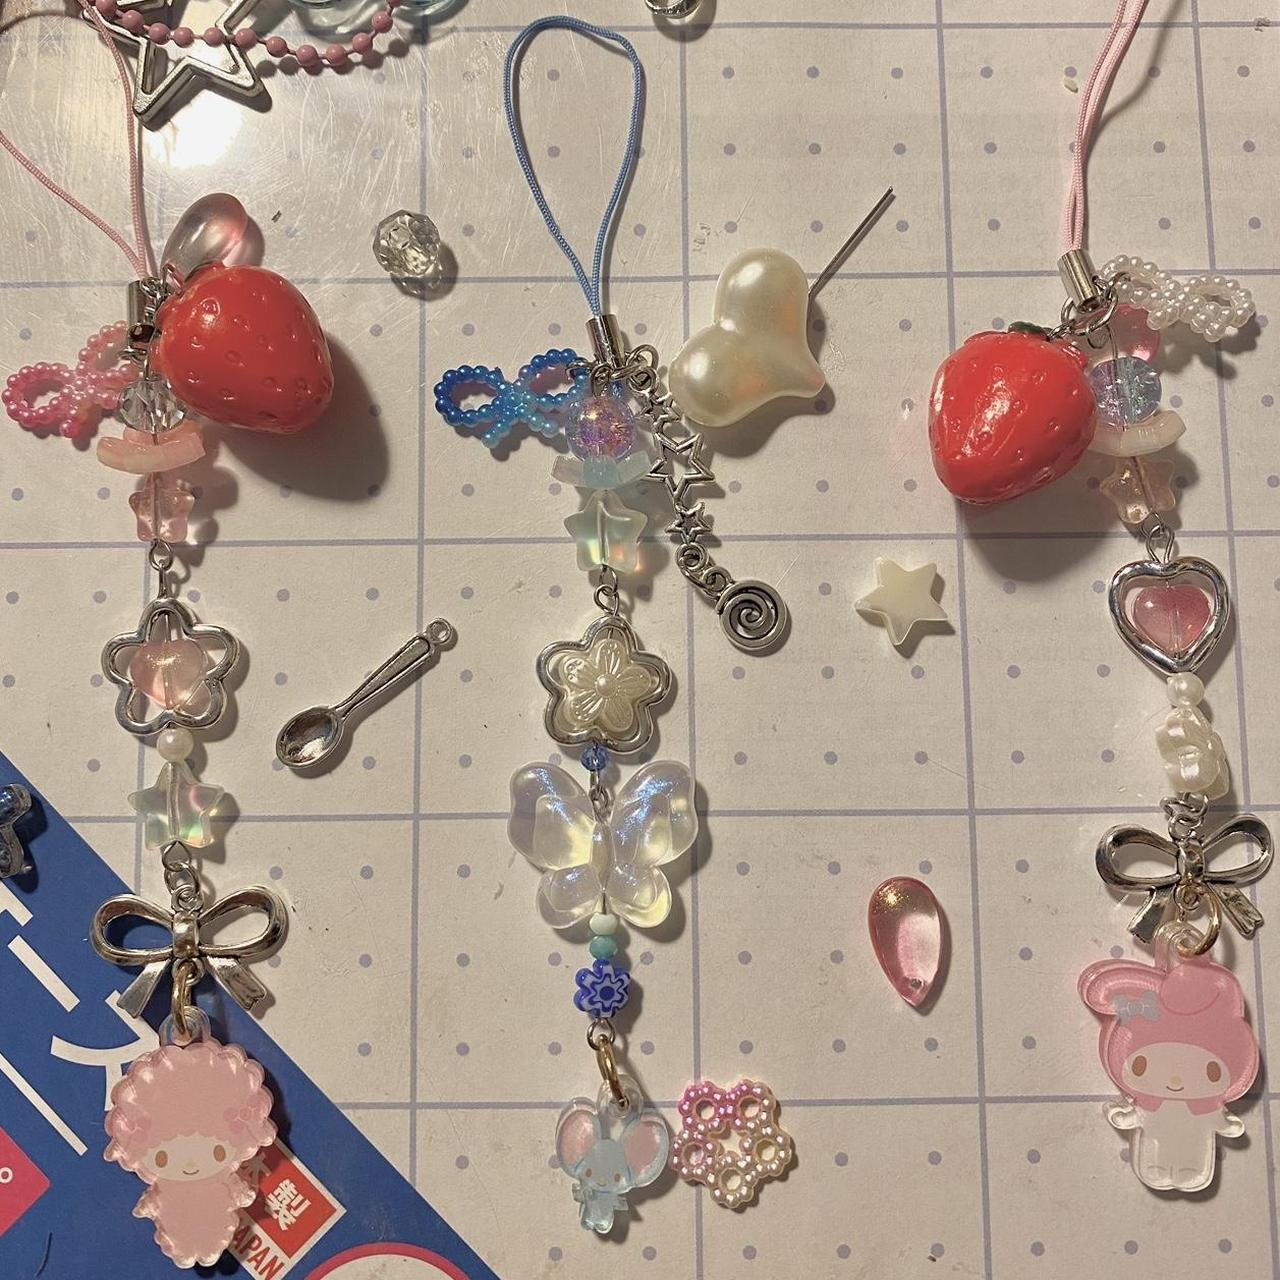 Sanrio Pink and Blue Mixed-media | Depop